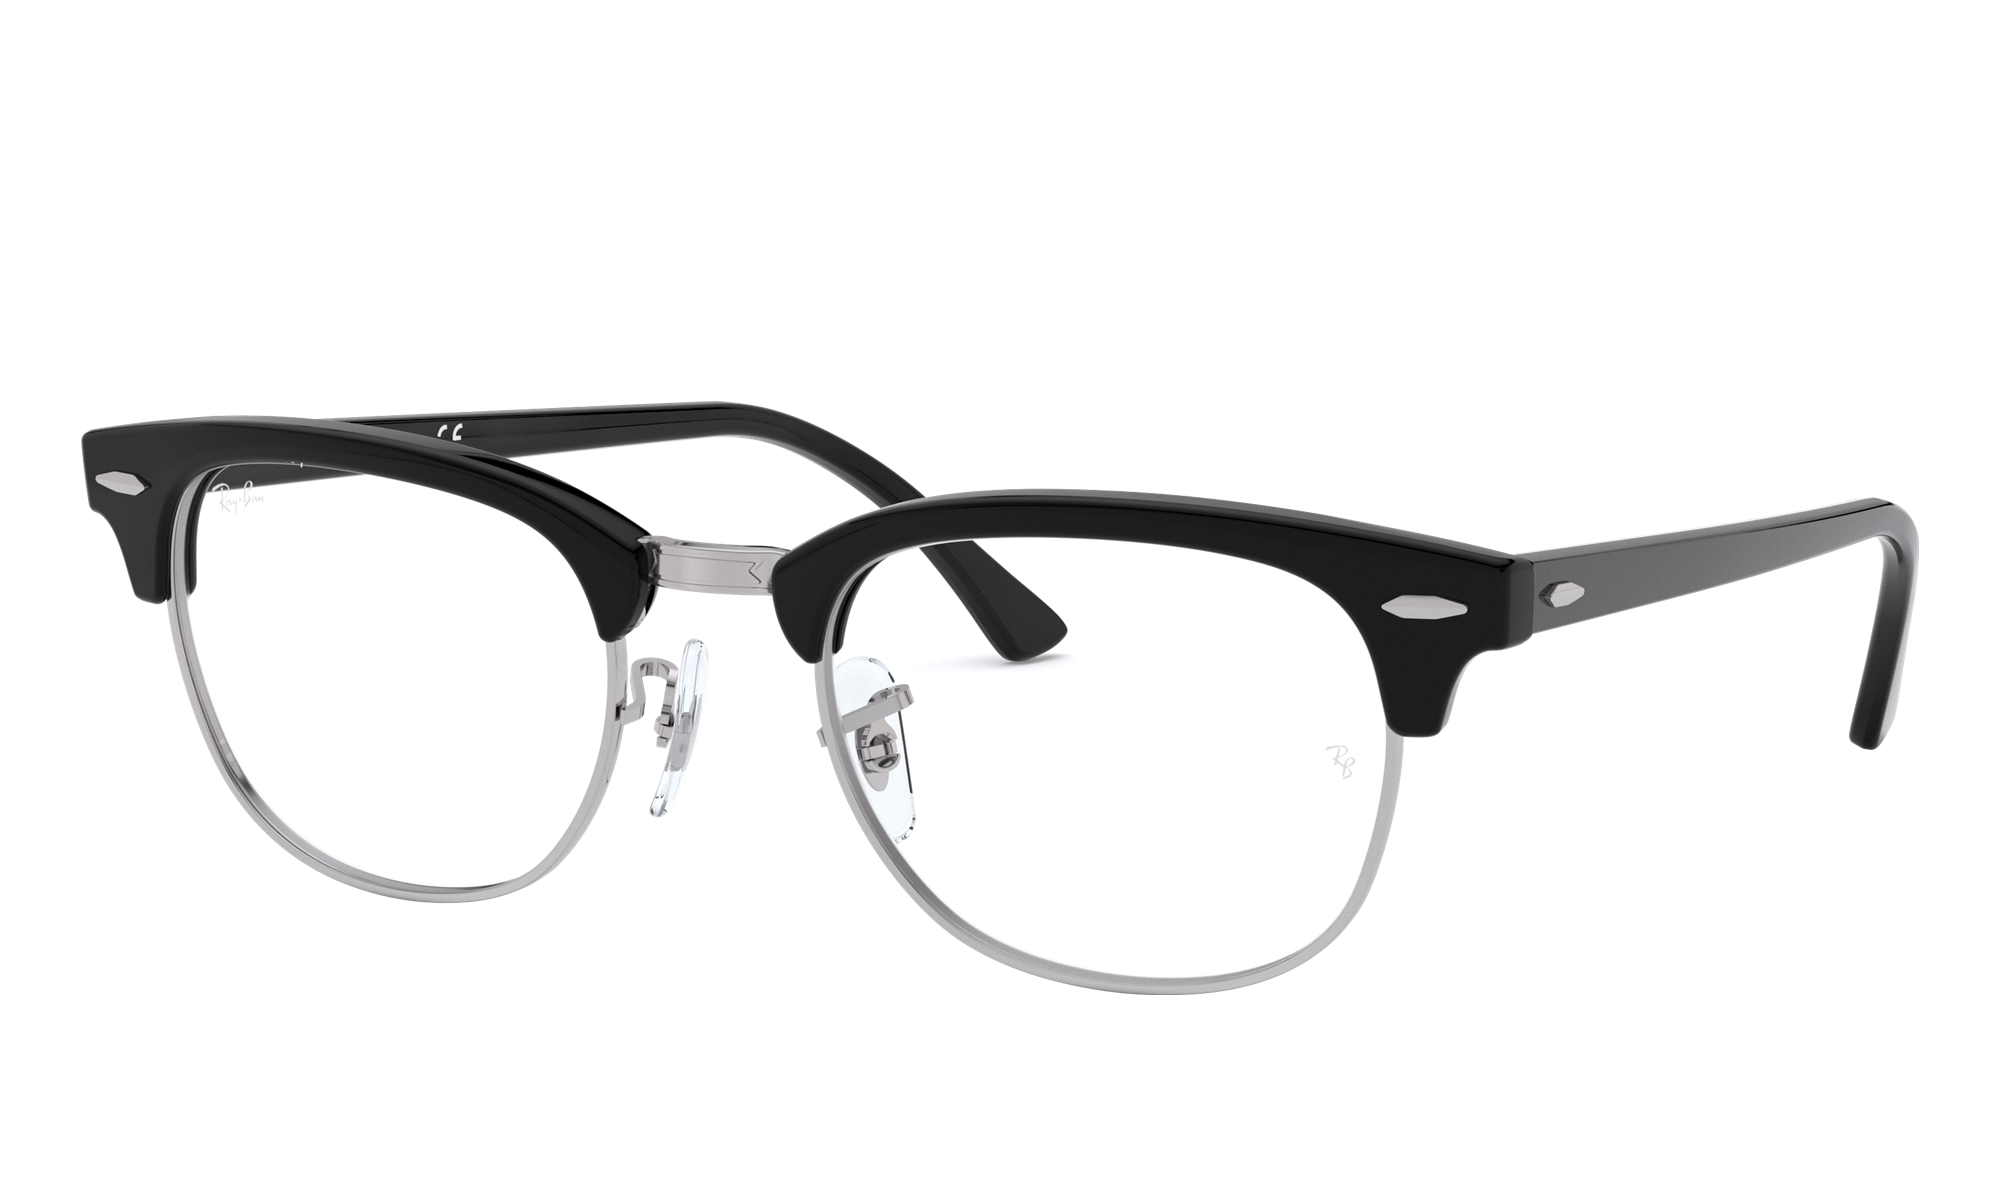 Ray-Ban Unisex Rx5154 Black On Silver Size: Standard